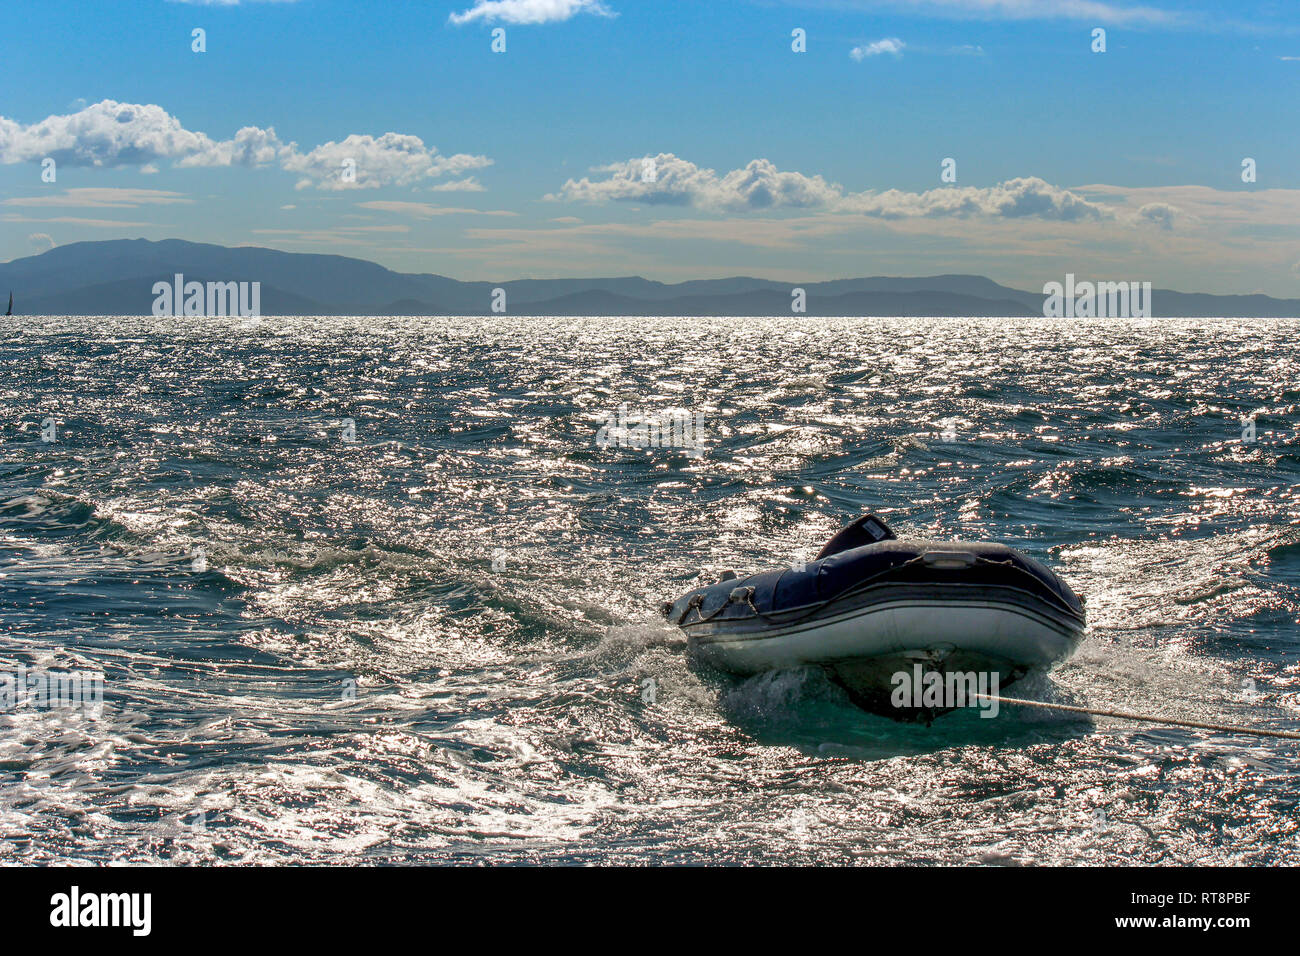 rescue boat behind cruise ship in shimmering water, travel Australia great barrier reef Stock Photo